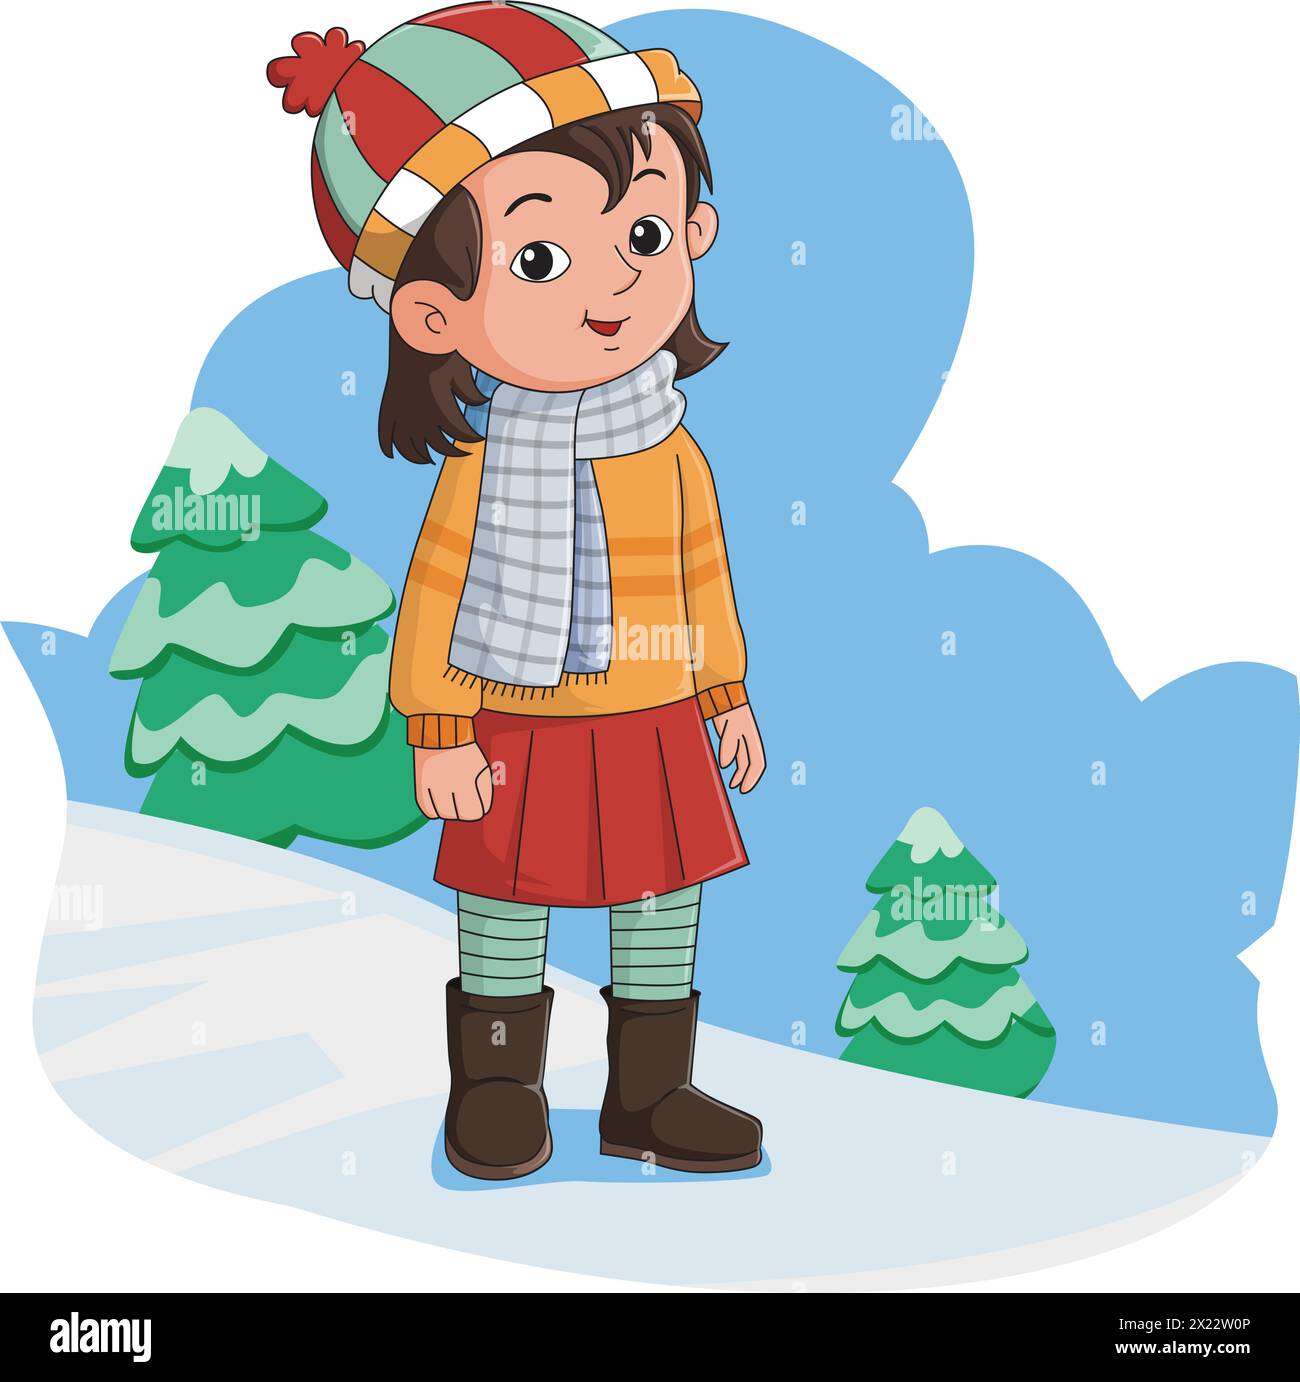 Cute smiling girl wearing winter clothes vector illustration Stock Vector